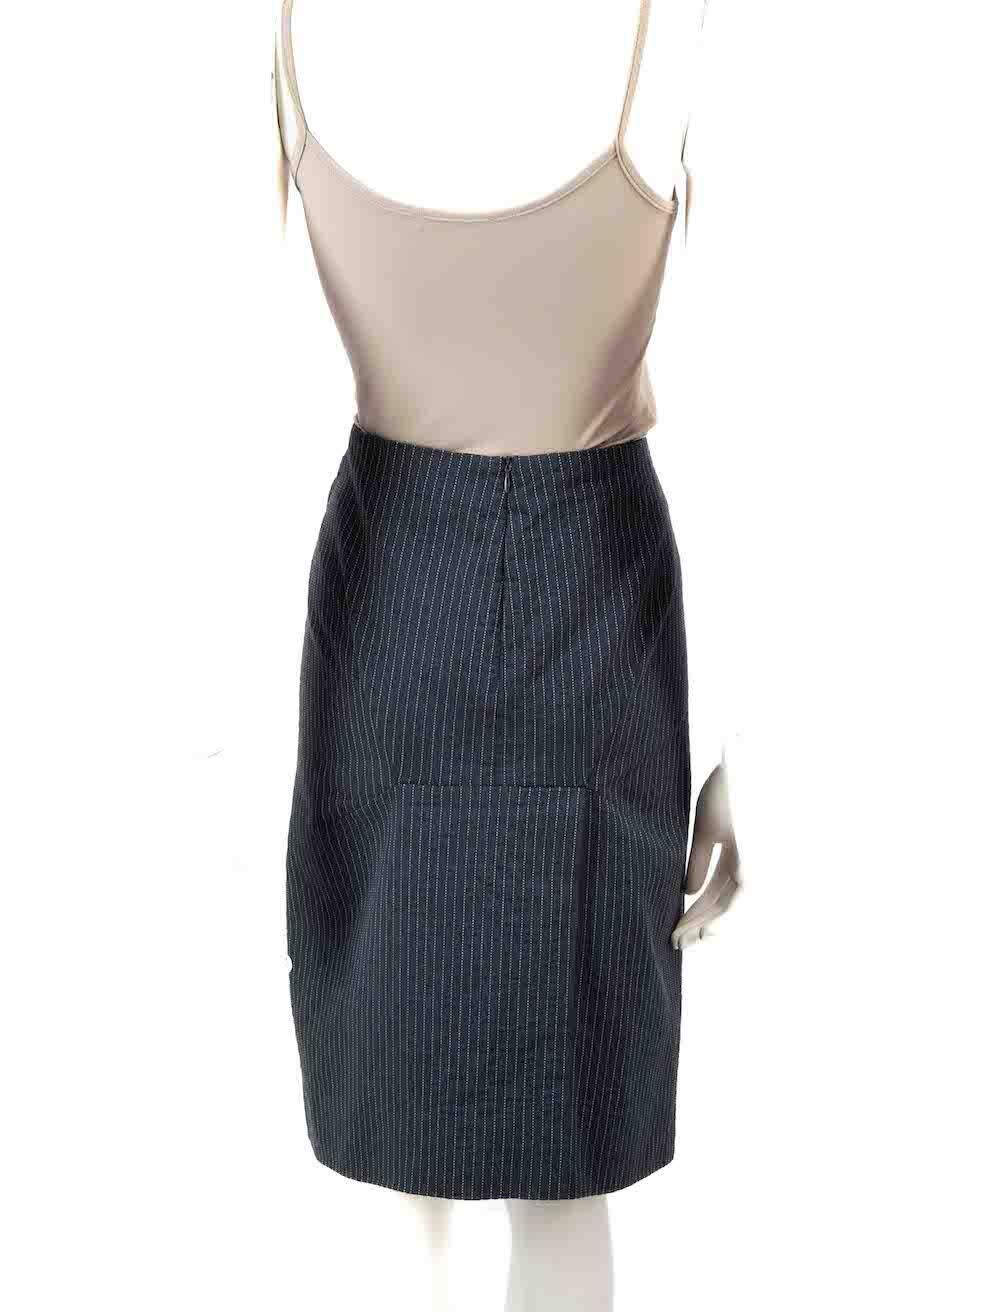 Vivienne Westwood Navy Pinstripe Knee Length Skirt Size XL In Excellent Condition For Sale In London, GB